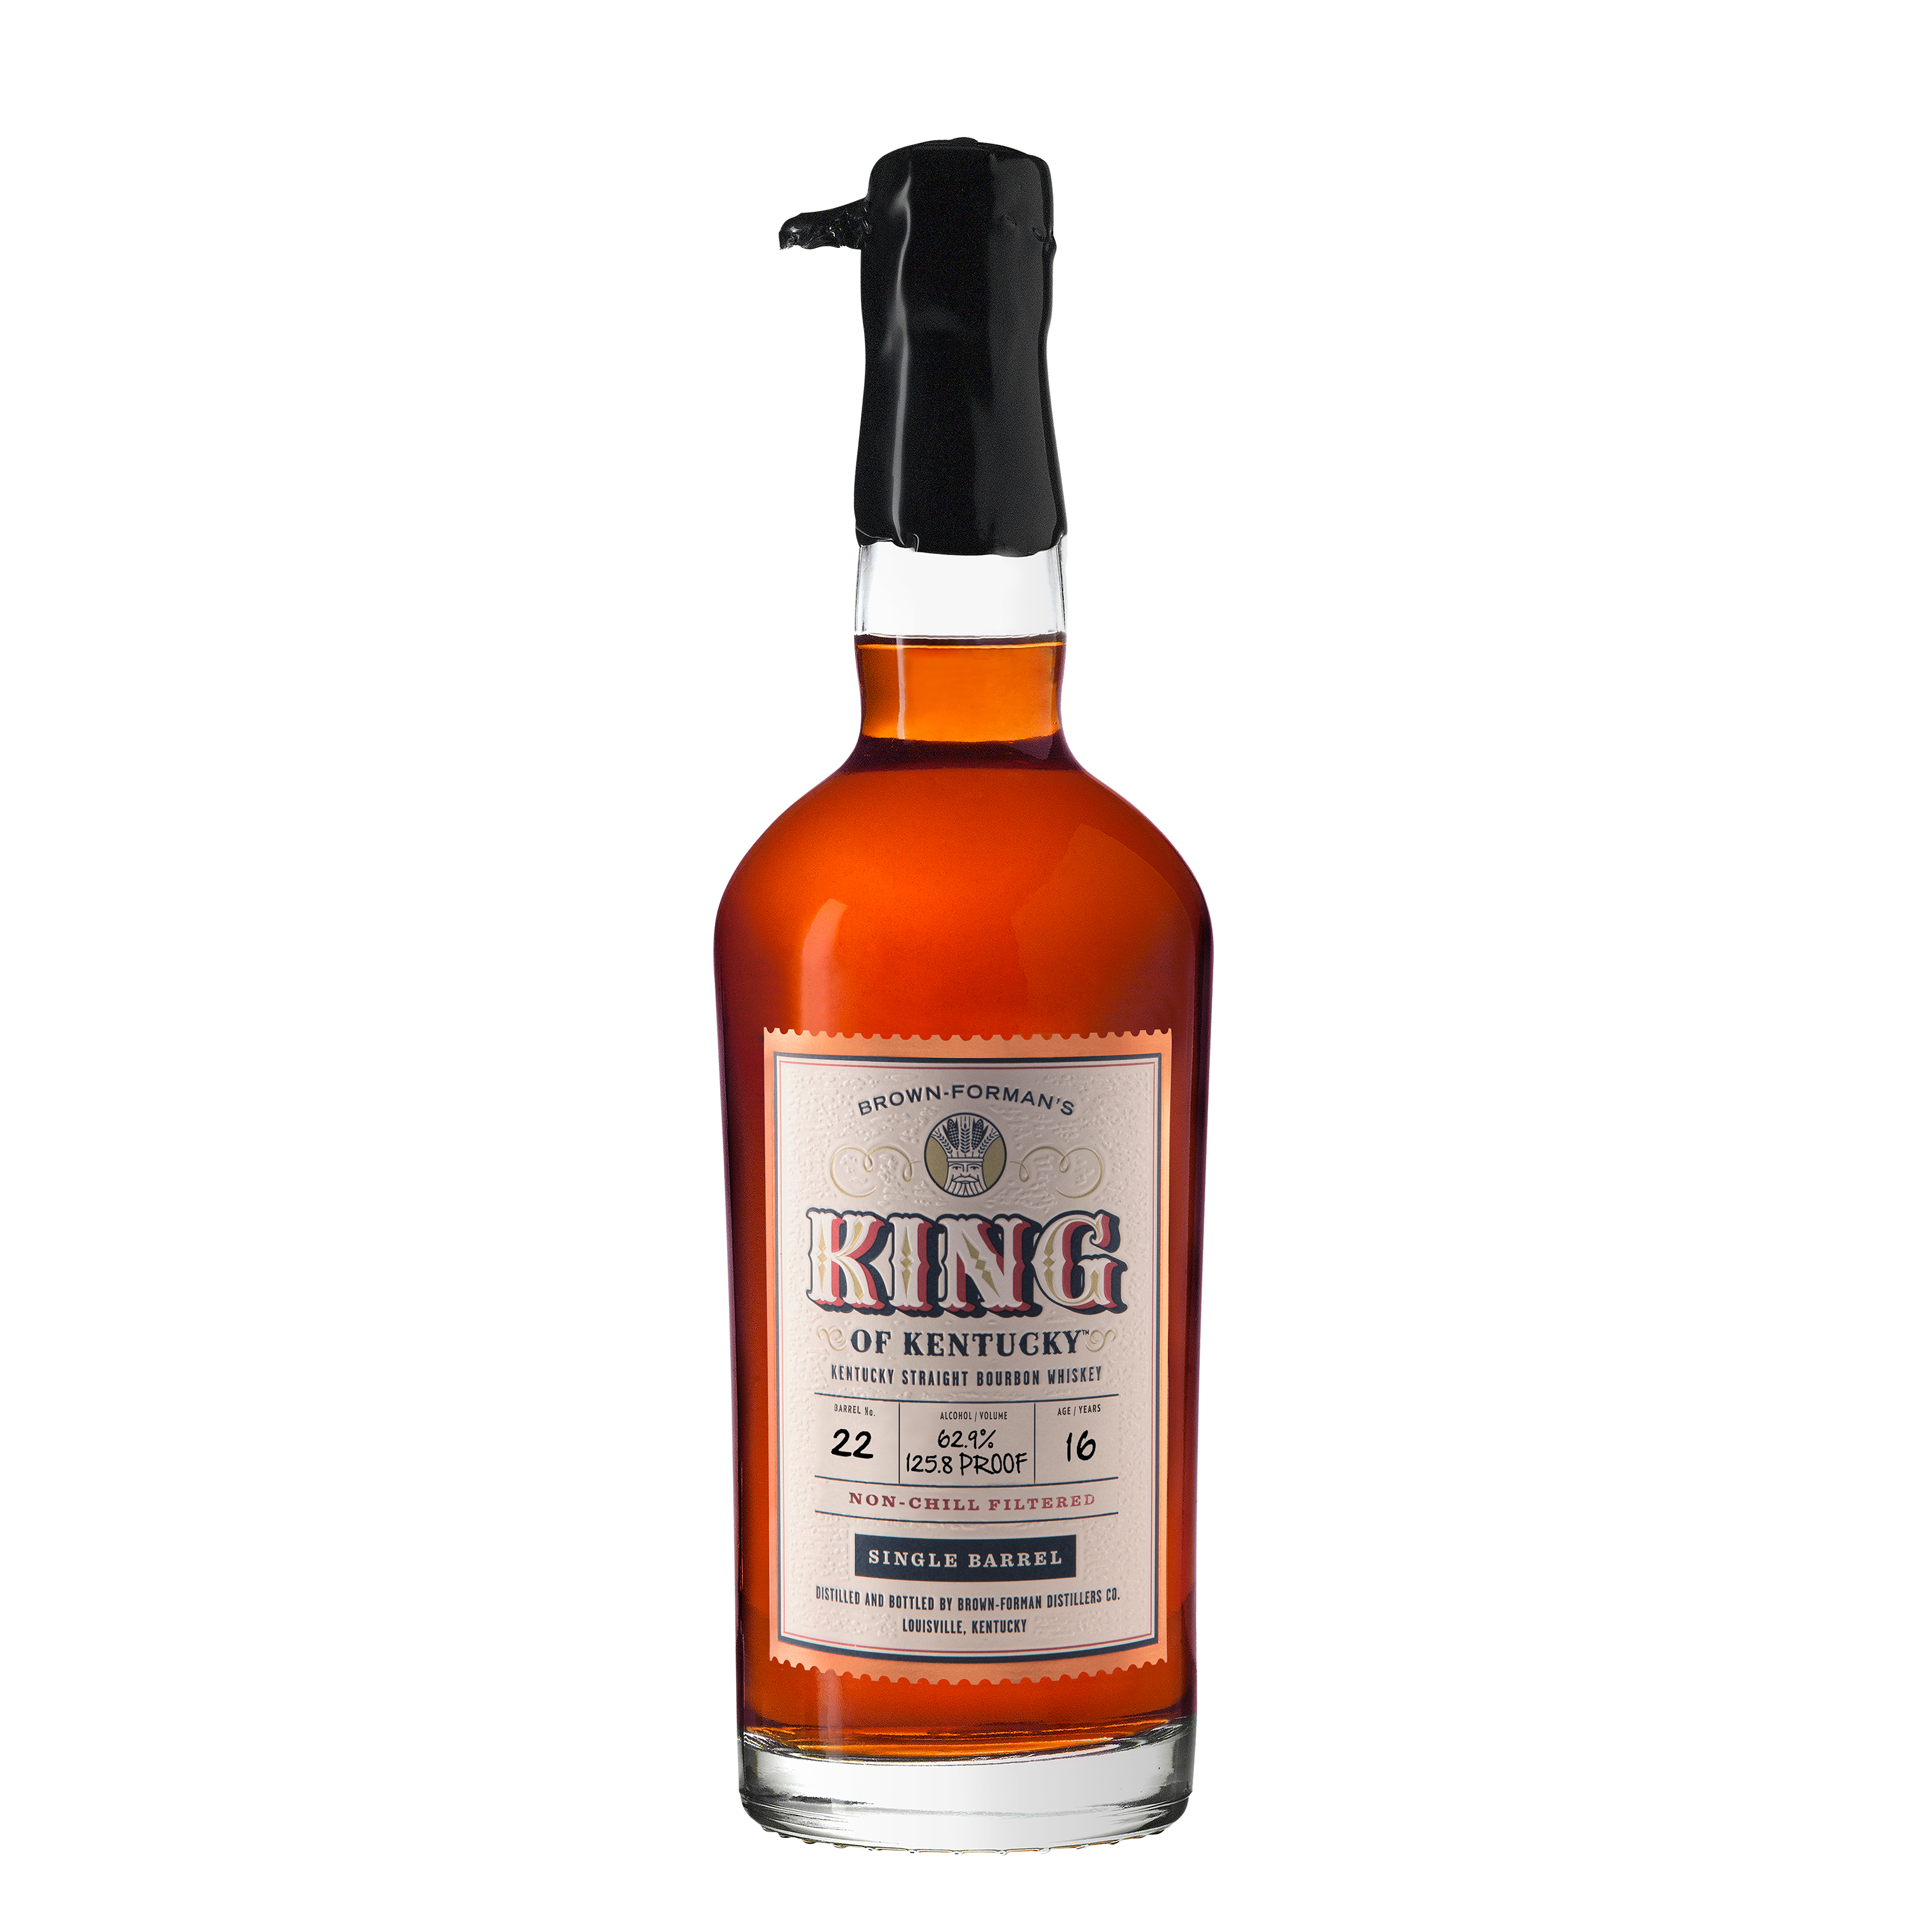 Brown-Forman Unleashes a Monster, 16 Year “King of Kentucky” Bourbon